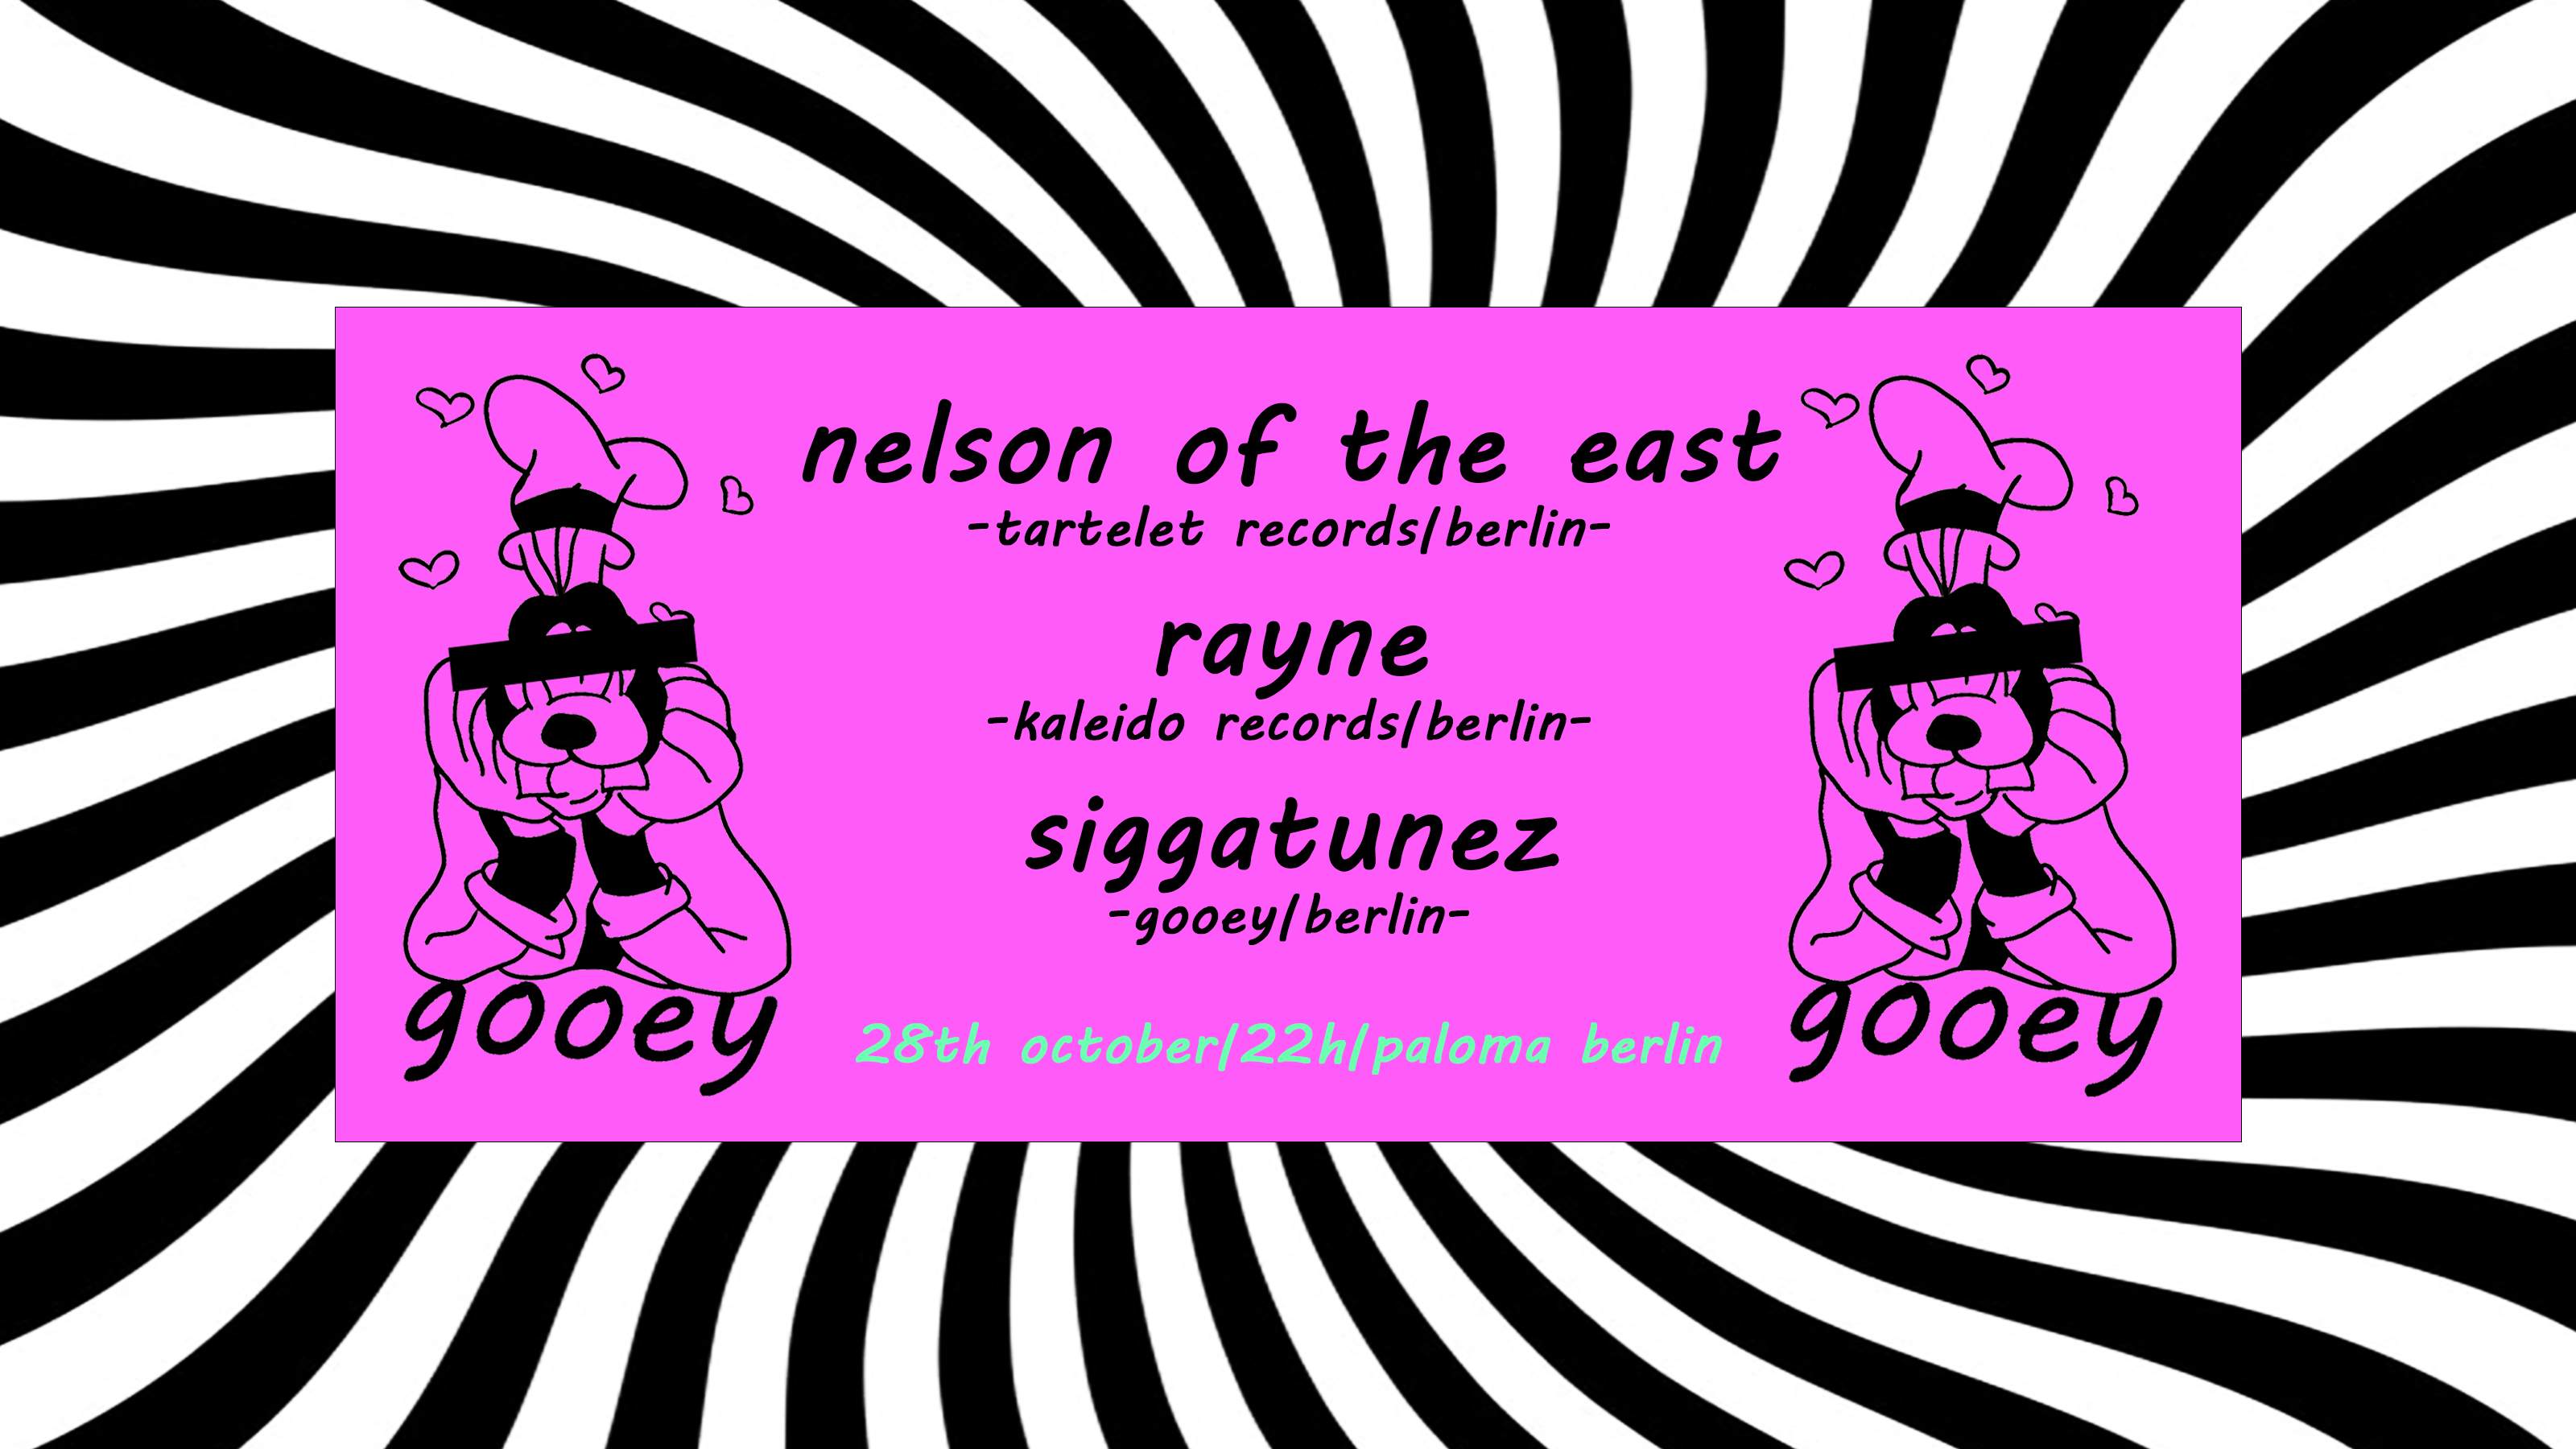 GOOEY with Nelson of the East, Rayne, Siggatunez - Flyer front